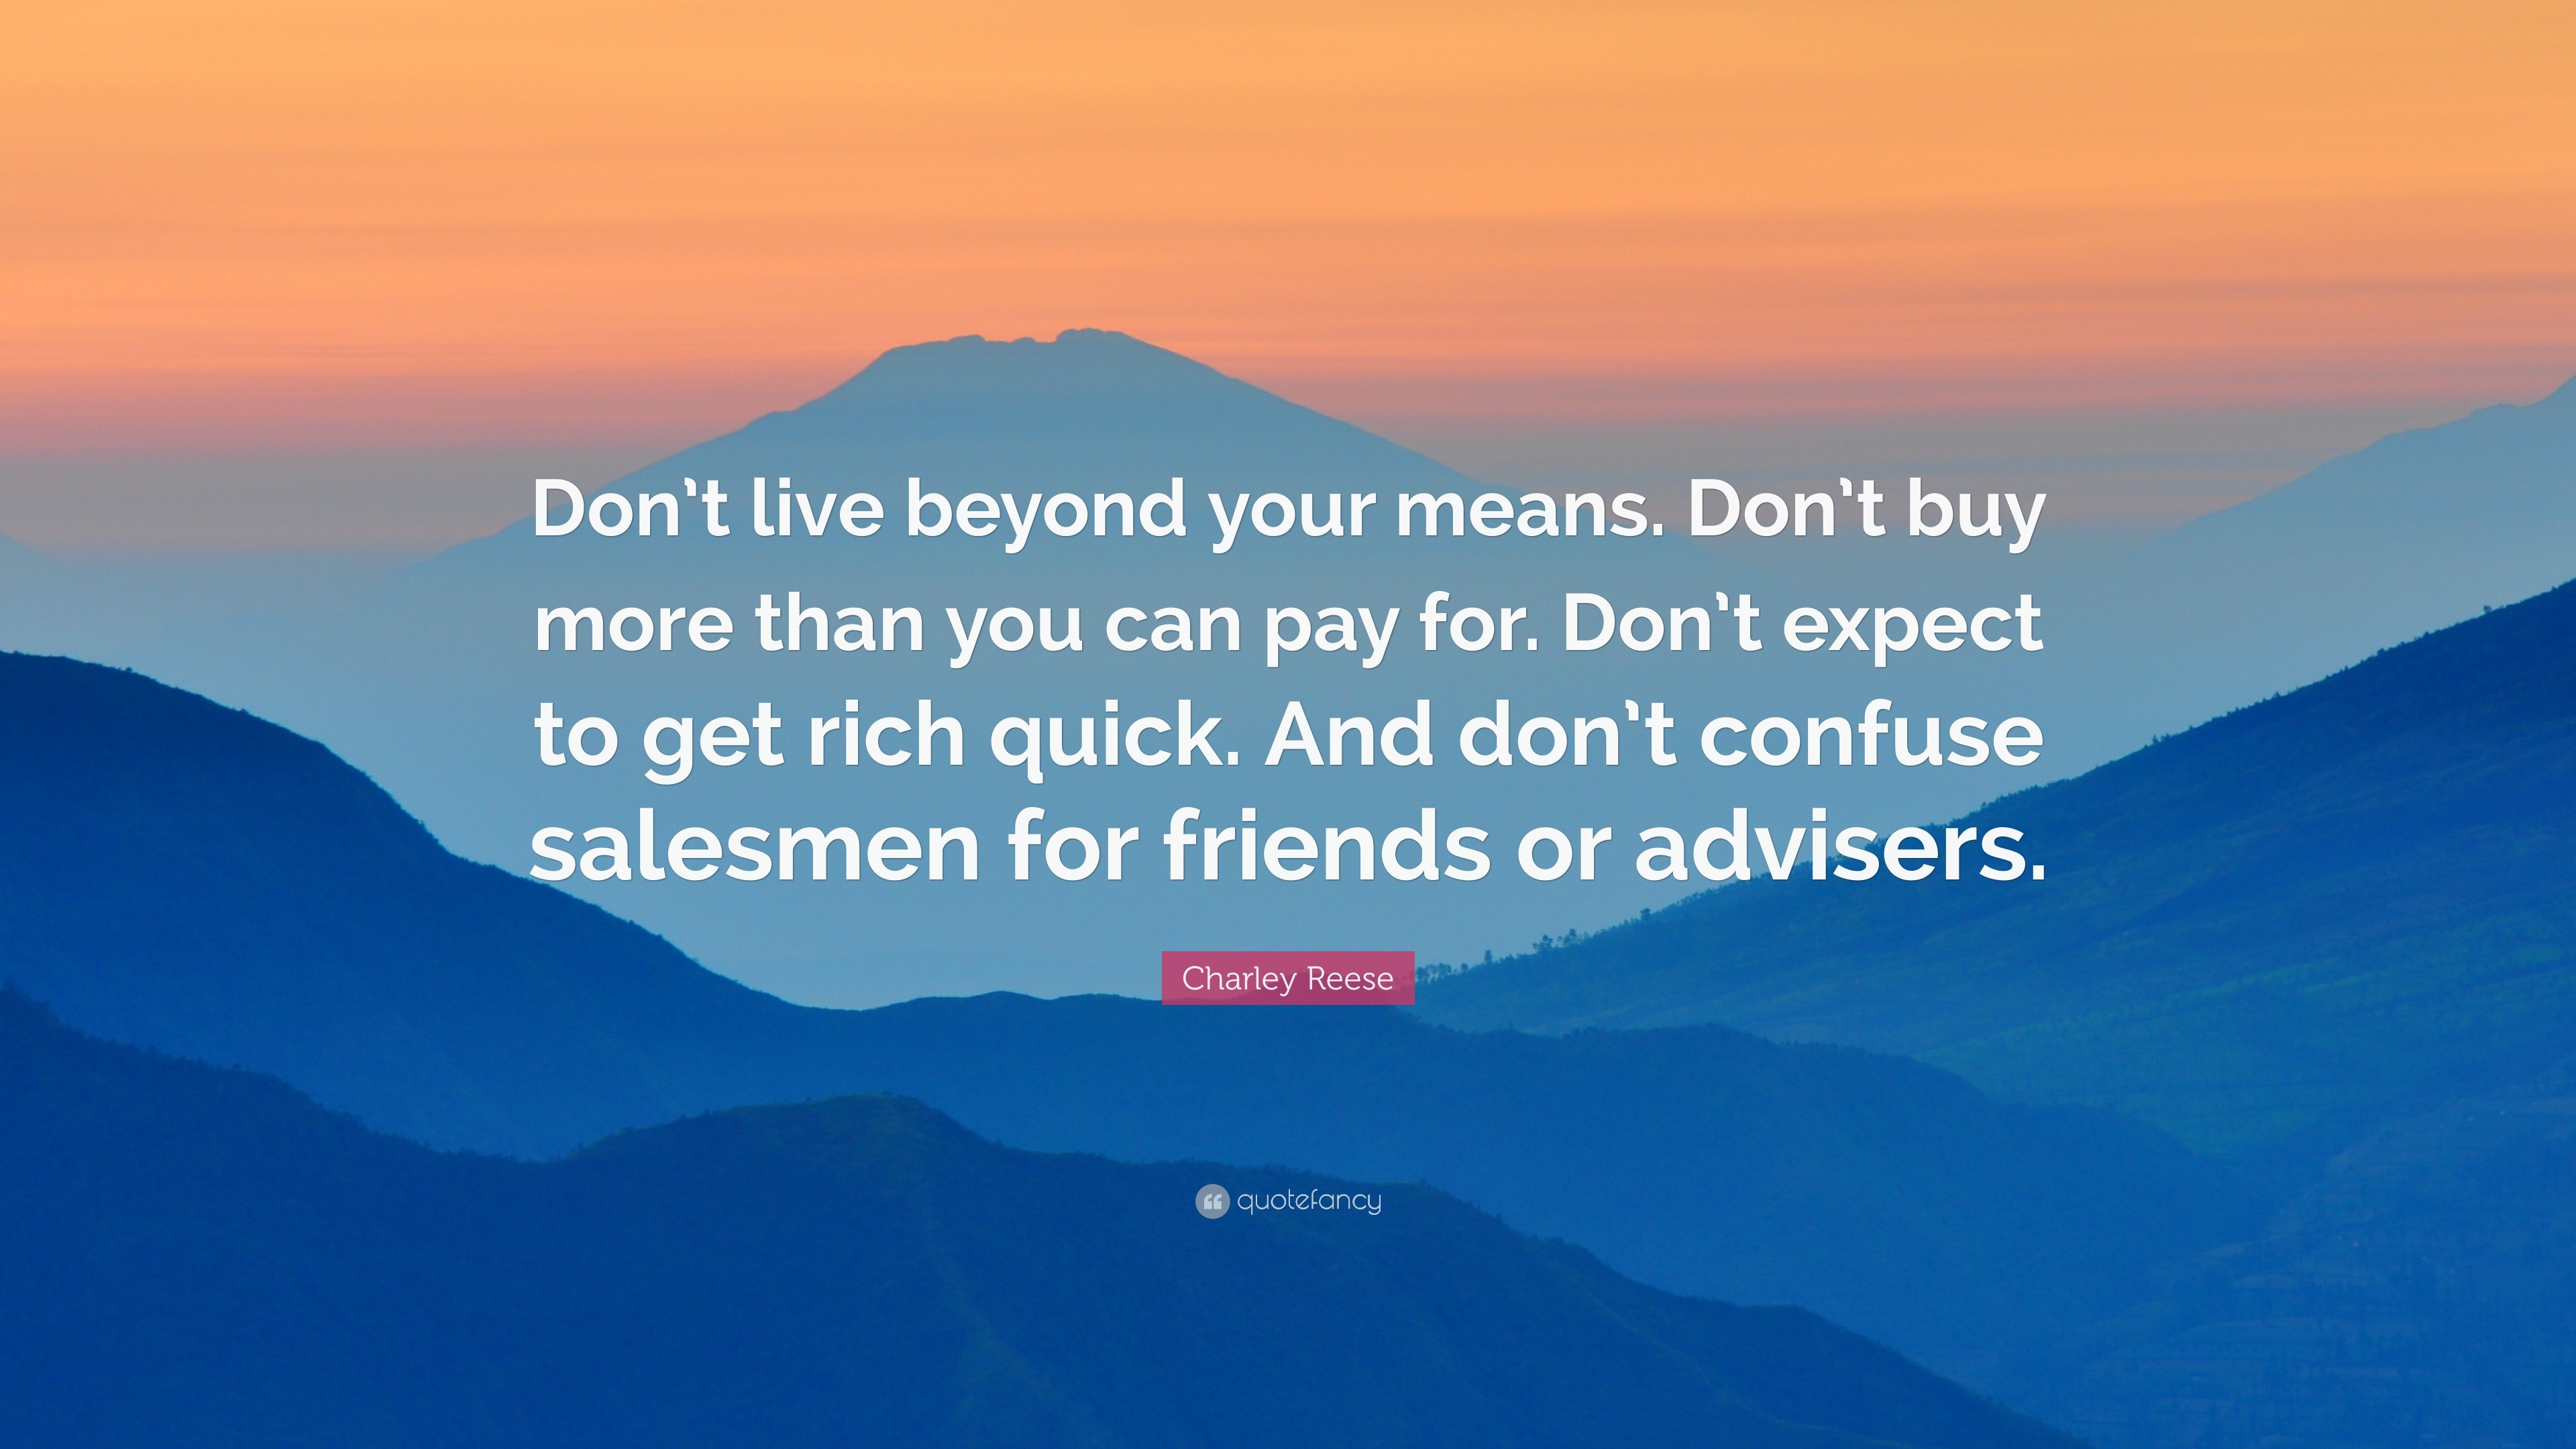 Live Beyond Your Means 💰Idiom Meaning - MyEnglishTeacher ...